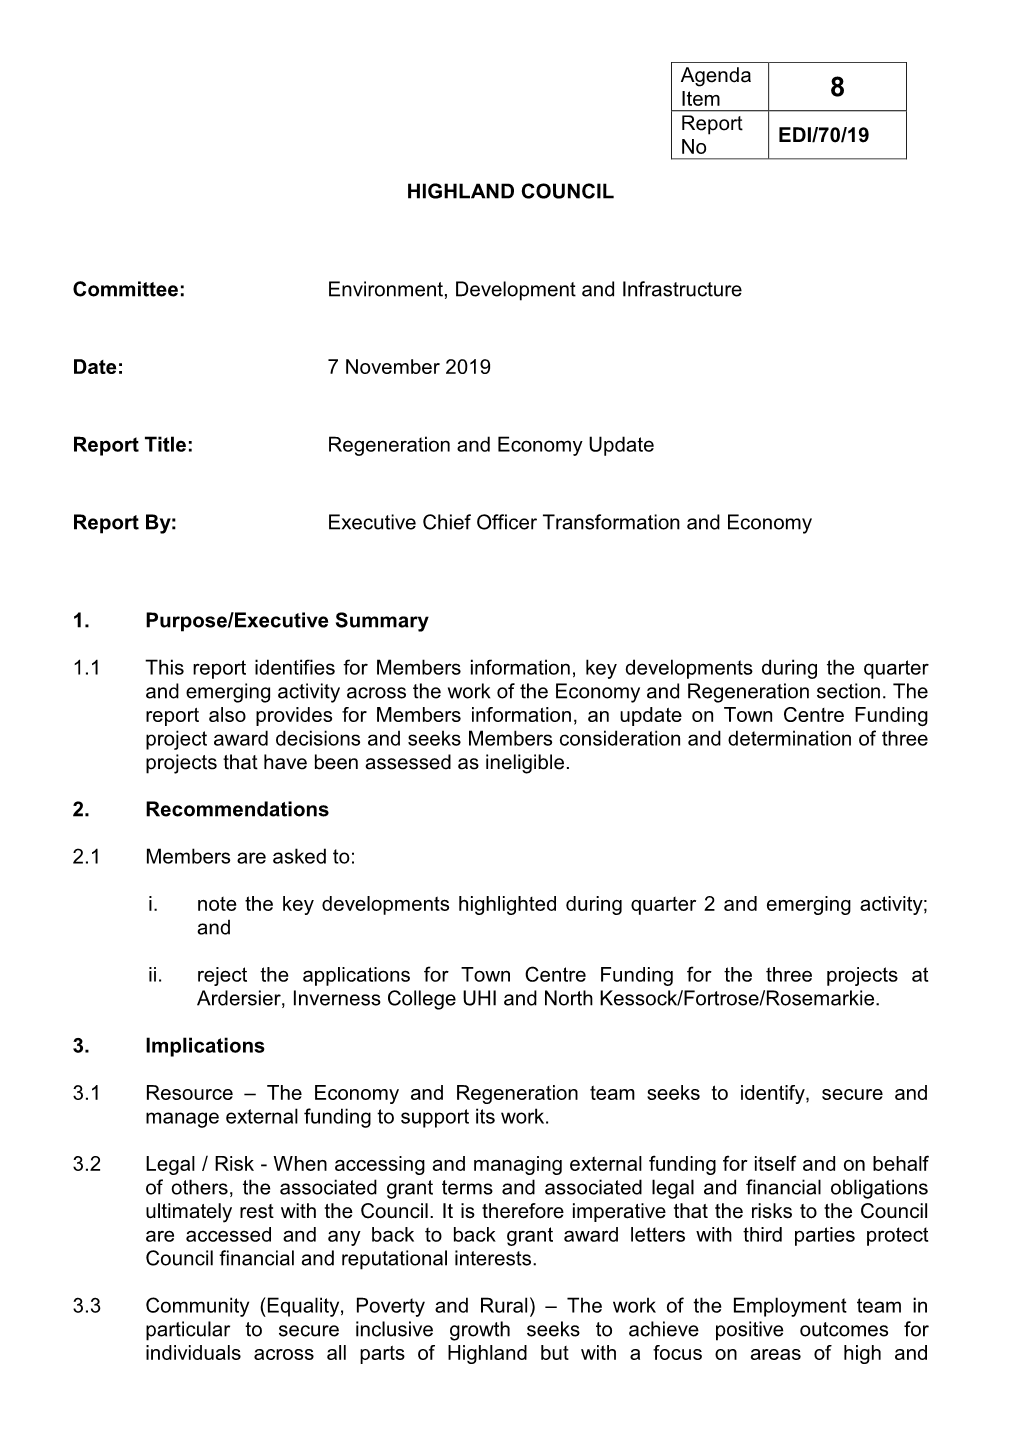 HIGHLAND COUNCIL Committee: Environment, Development and Infrastructure Date: 7 November 2019 Report Title: Regeneration And